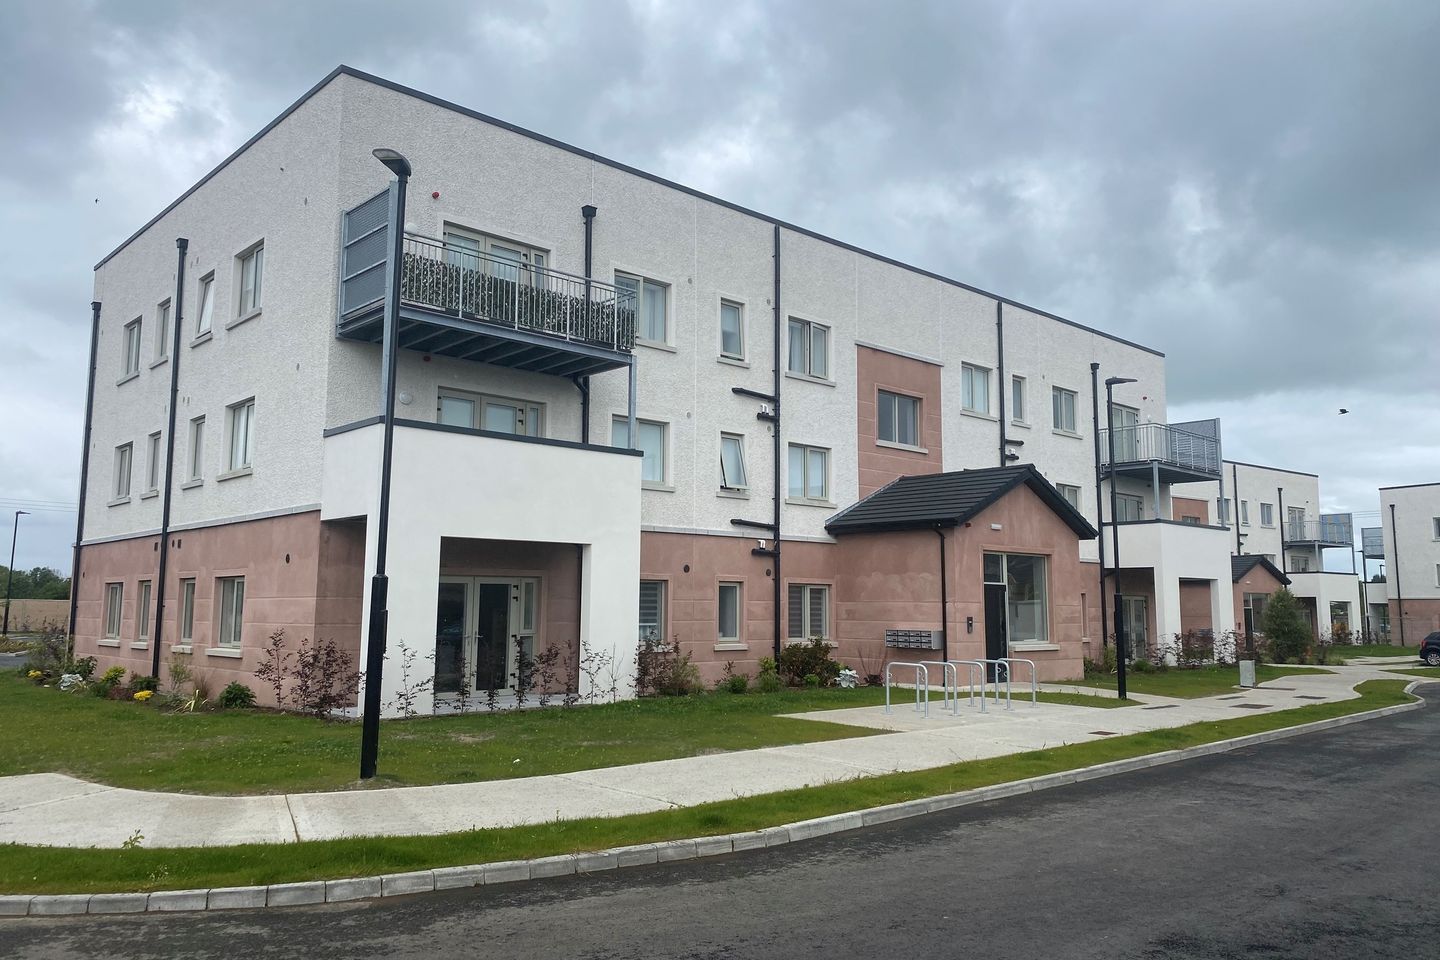 2 Bed Apartments, Aughamore, Aughamore, Clane, Co. Kildare